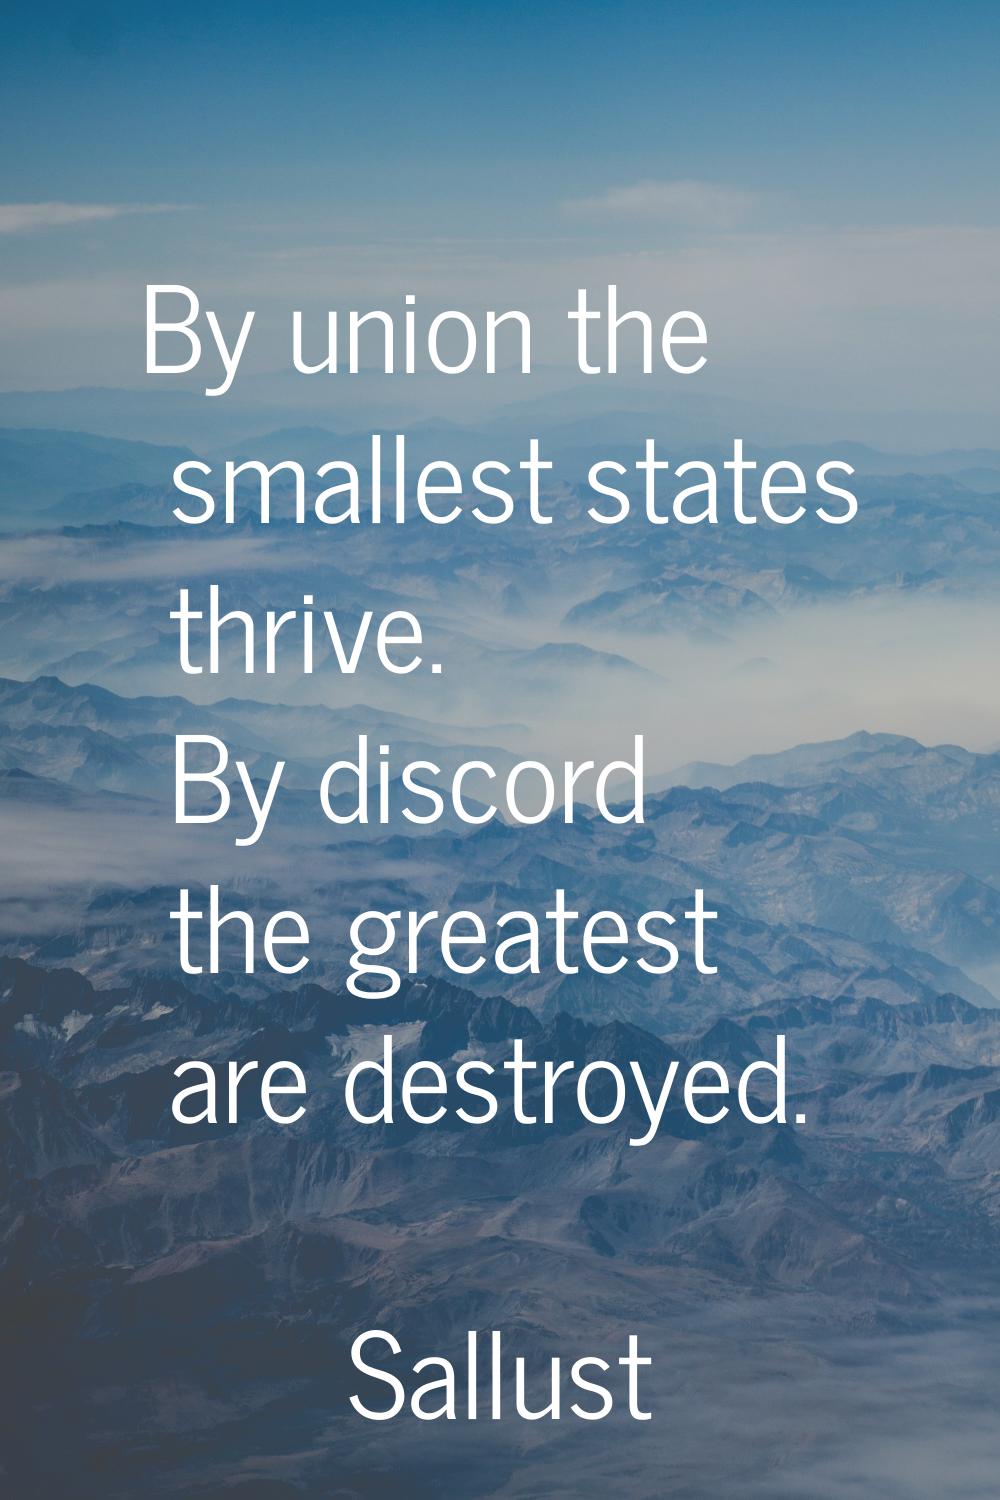 By union the smallest states thrive. By discord the greatest are destroyed.